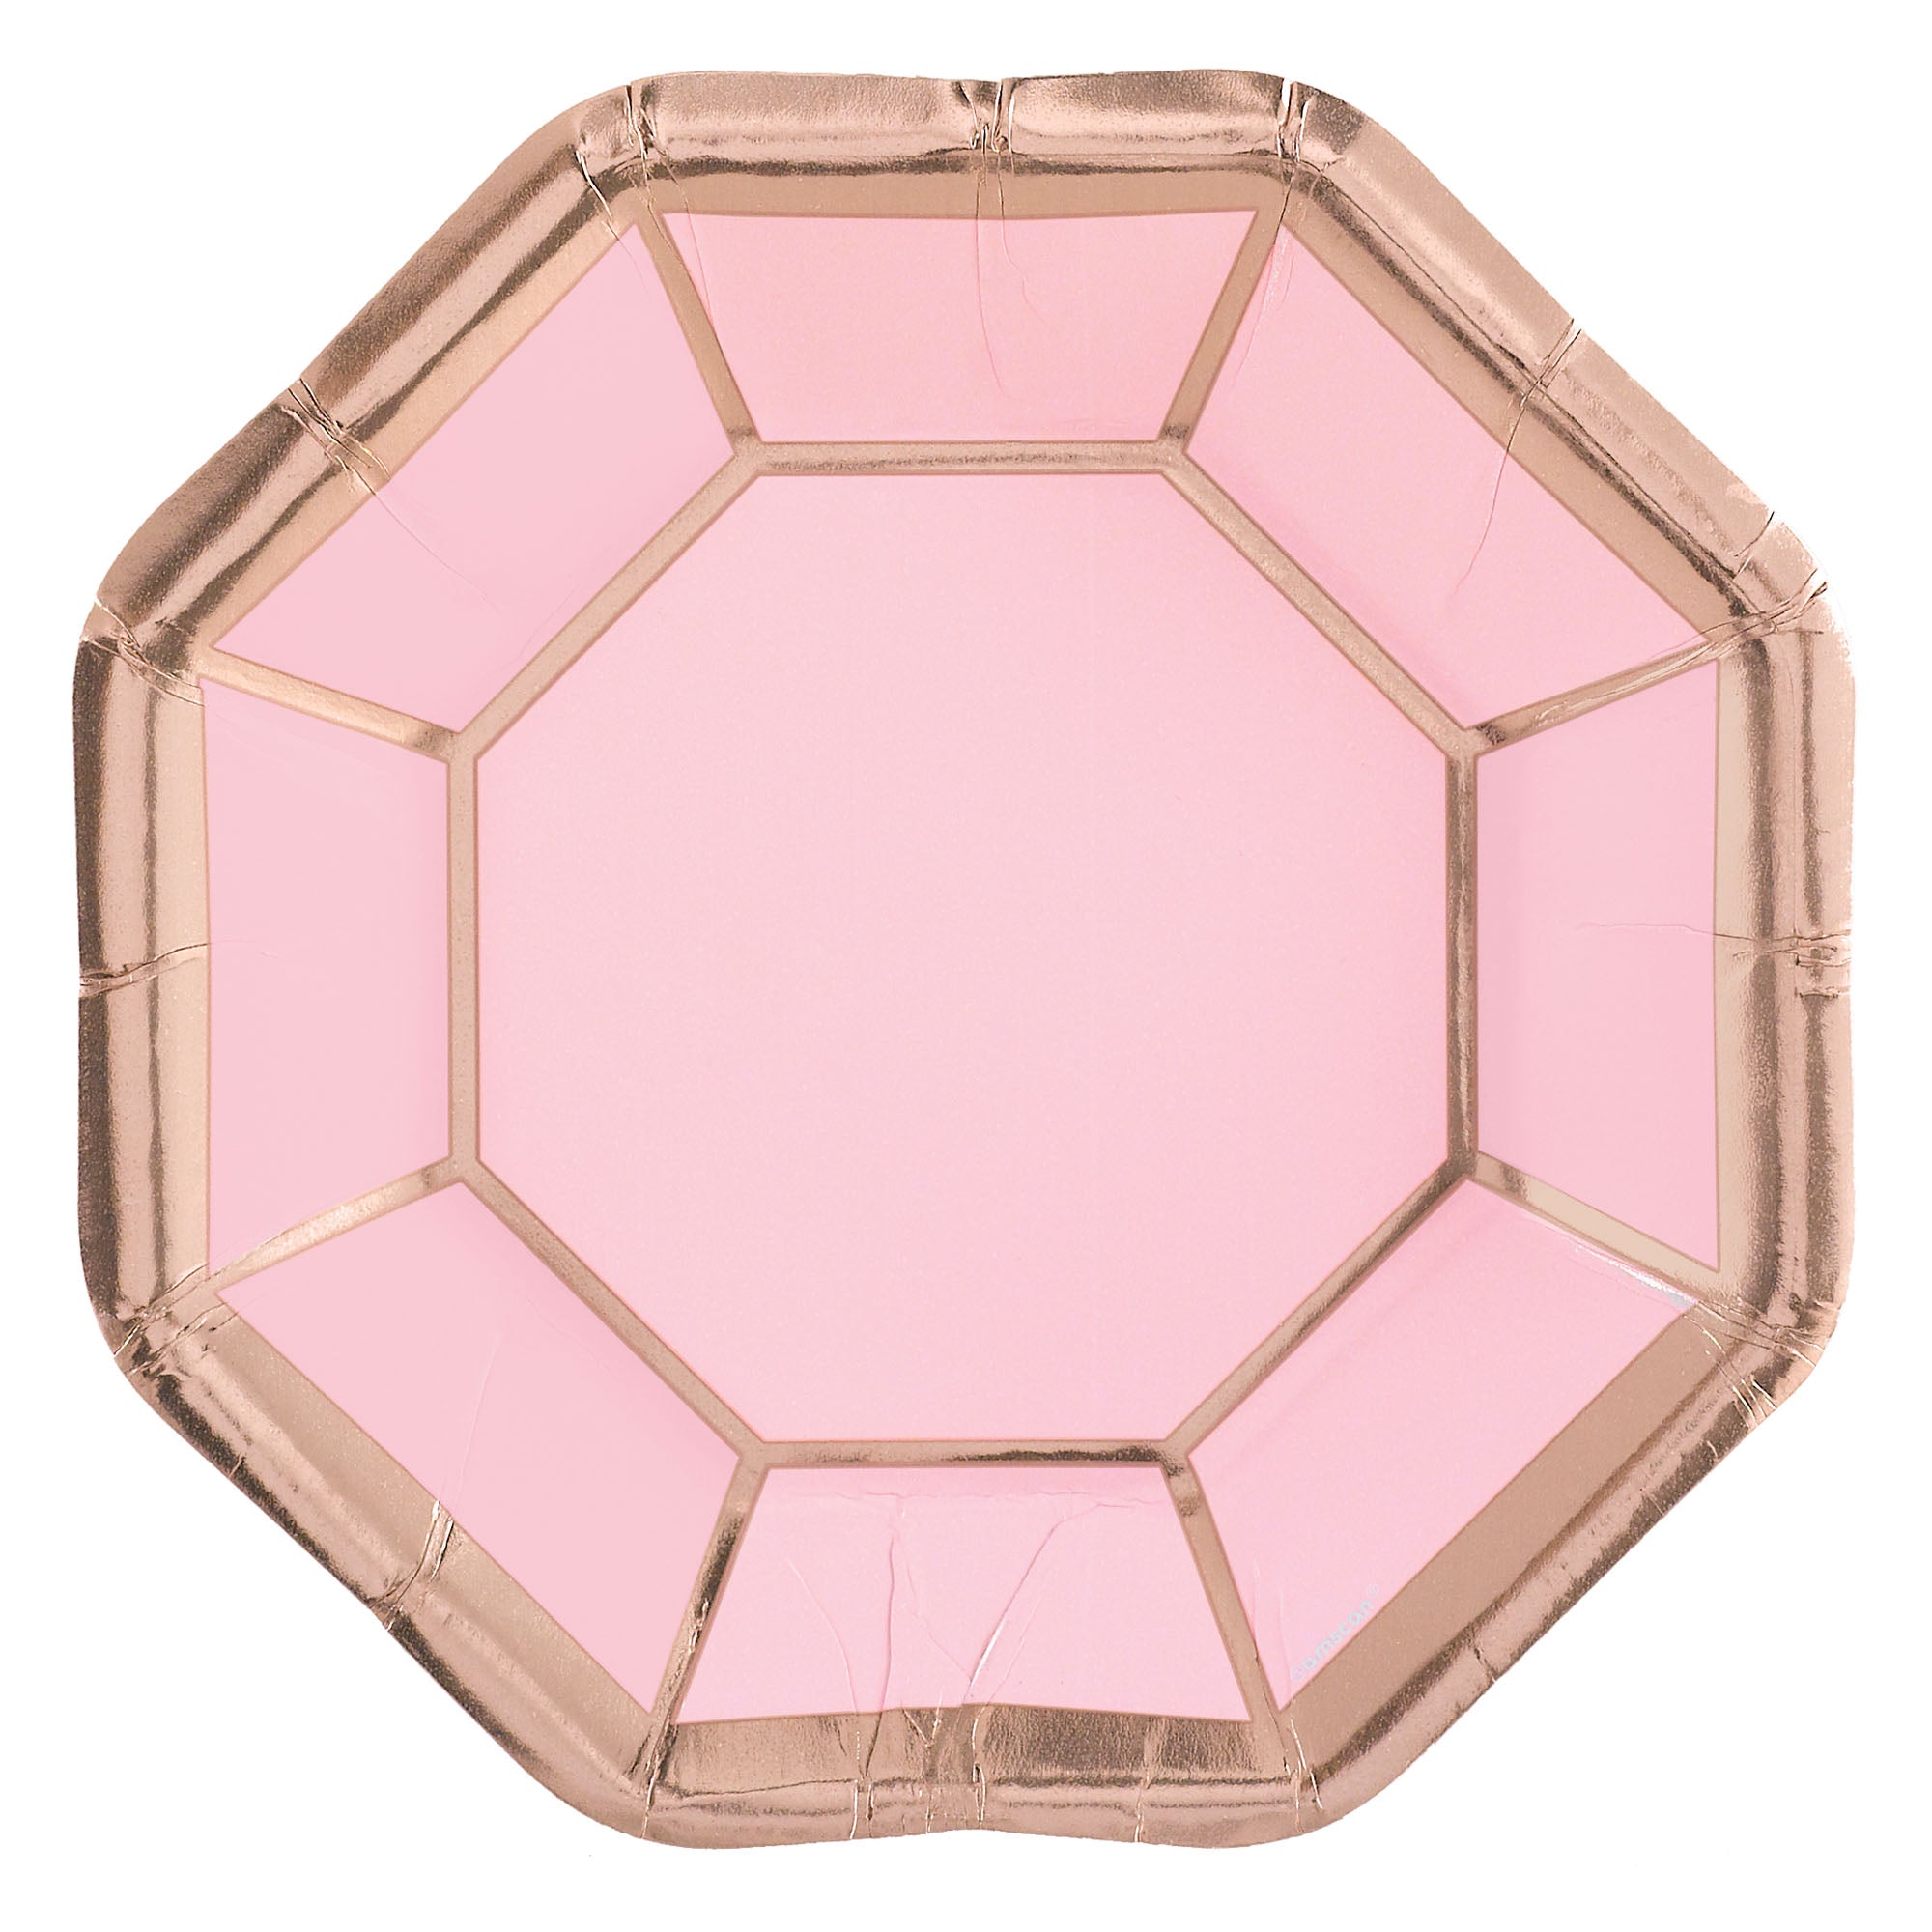 Blush and Rose Gold Metallic 7" Octagonal Plates Package of 8